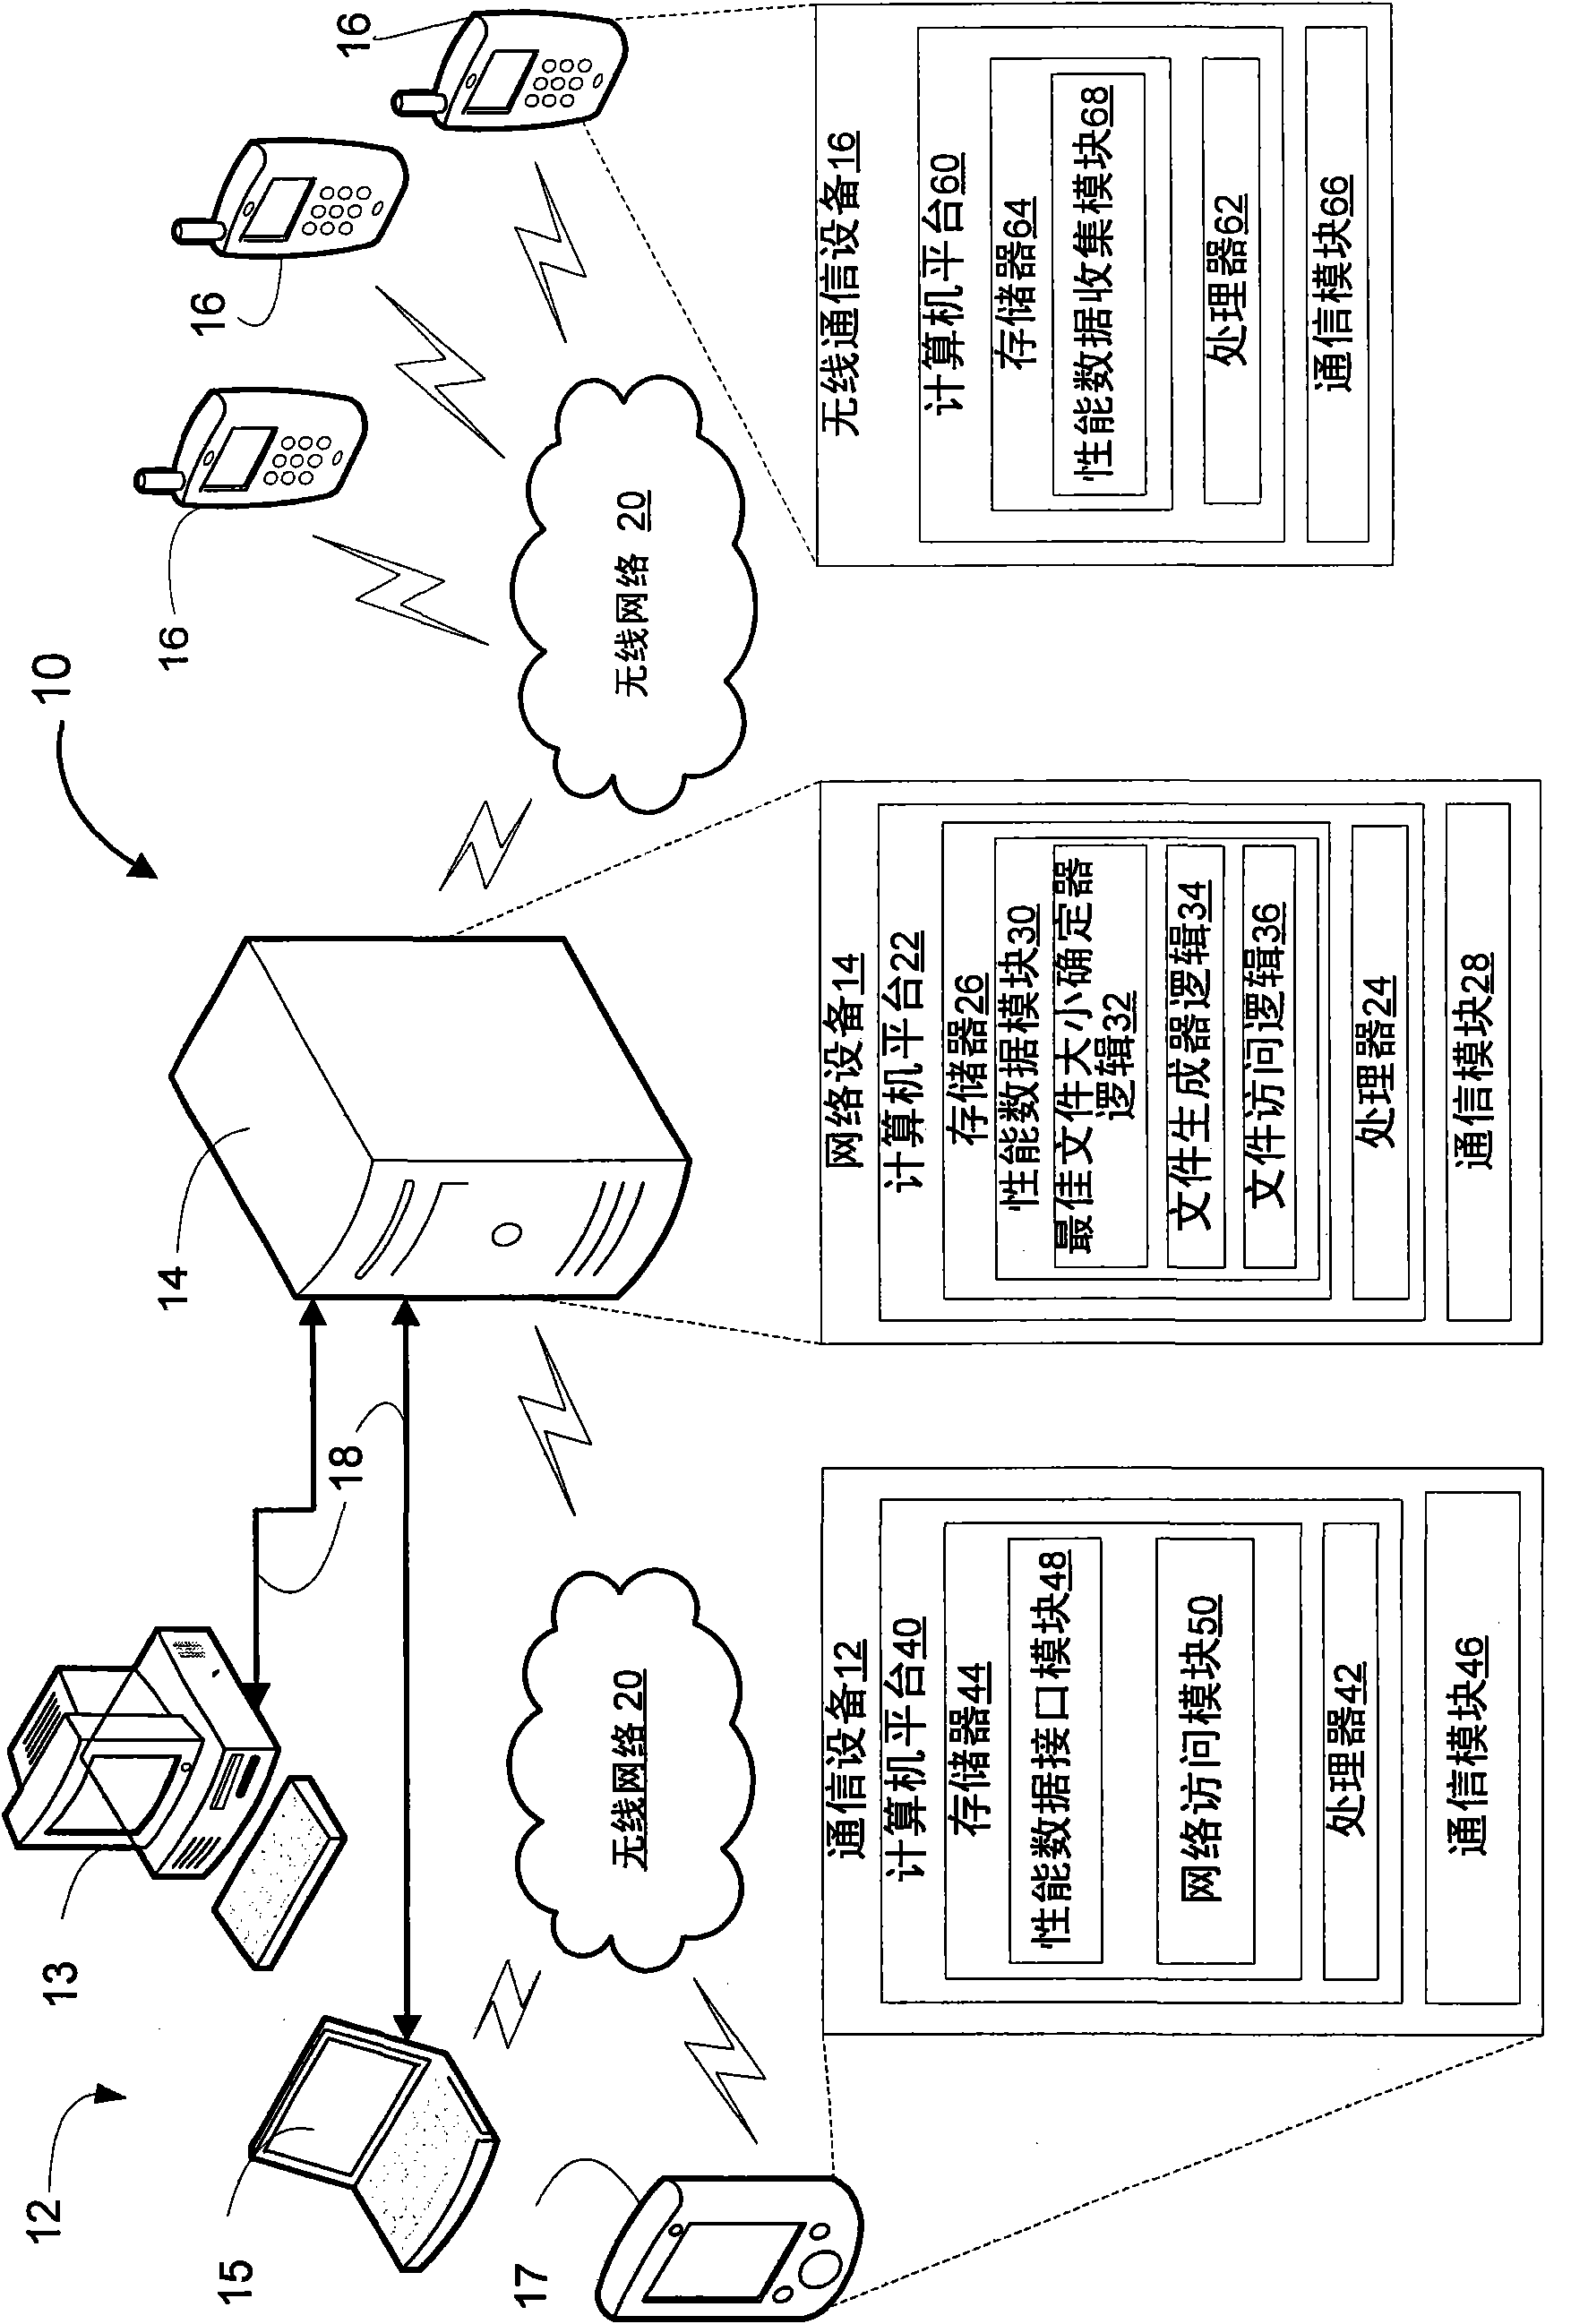 Methods and apparatus for requesting wireless communication device performance data and providing the data in optimal file size